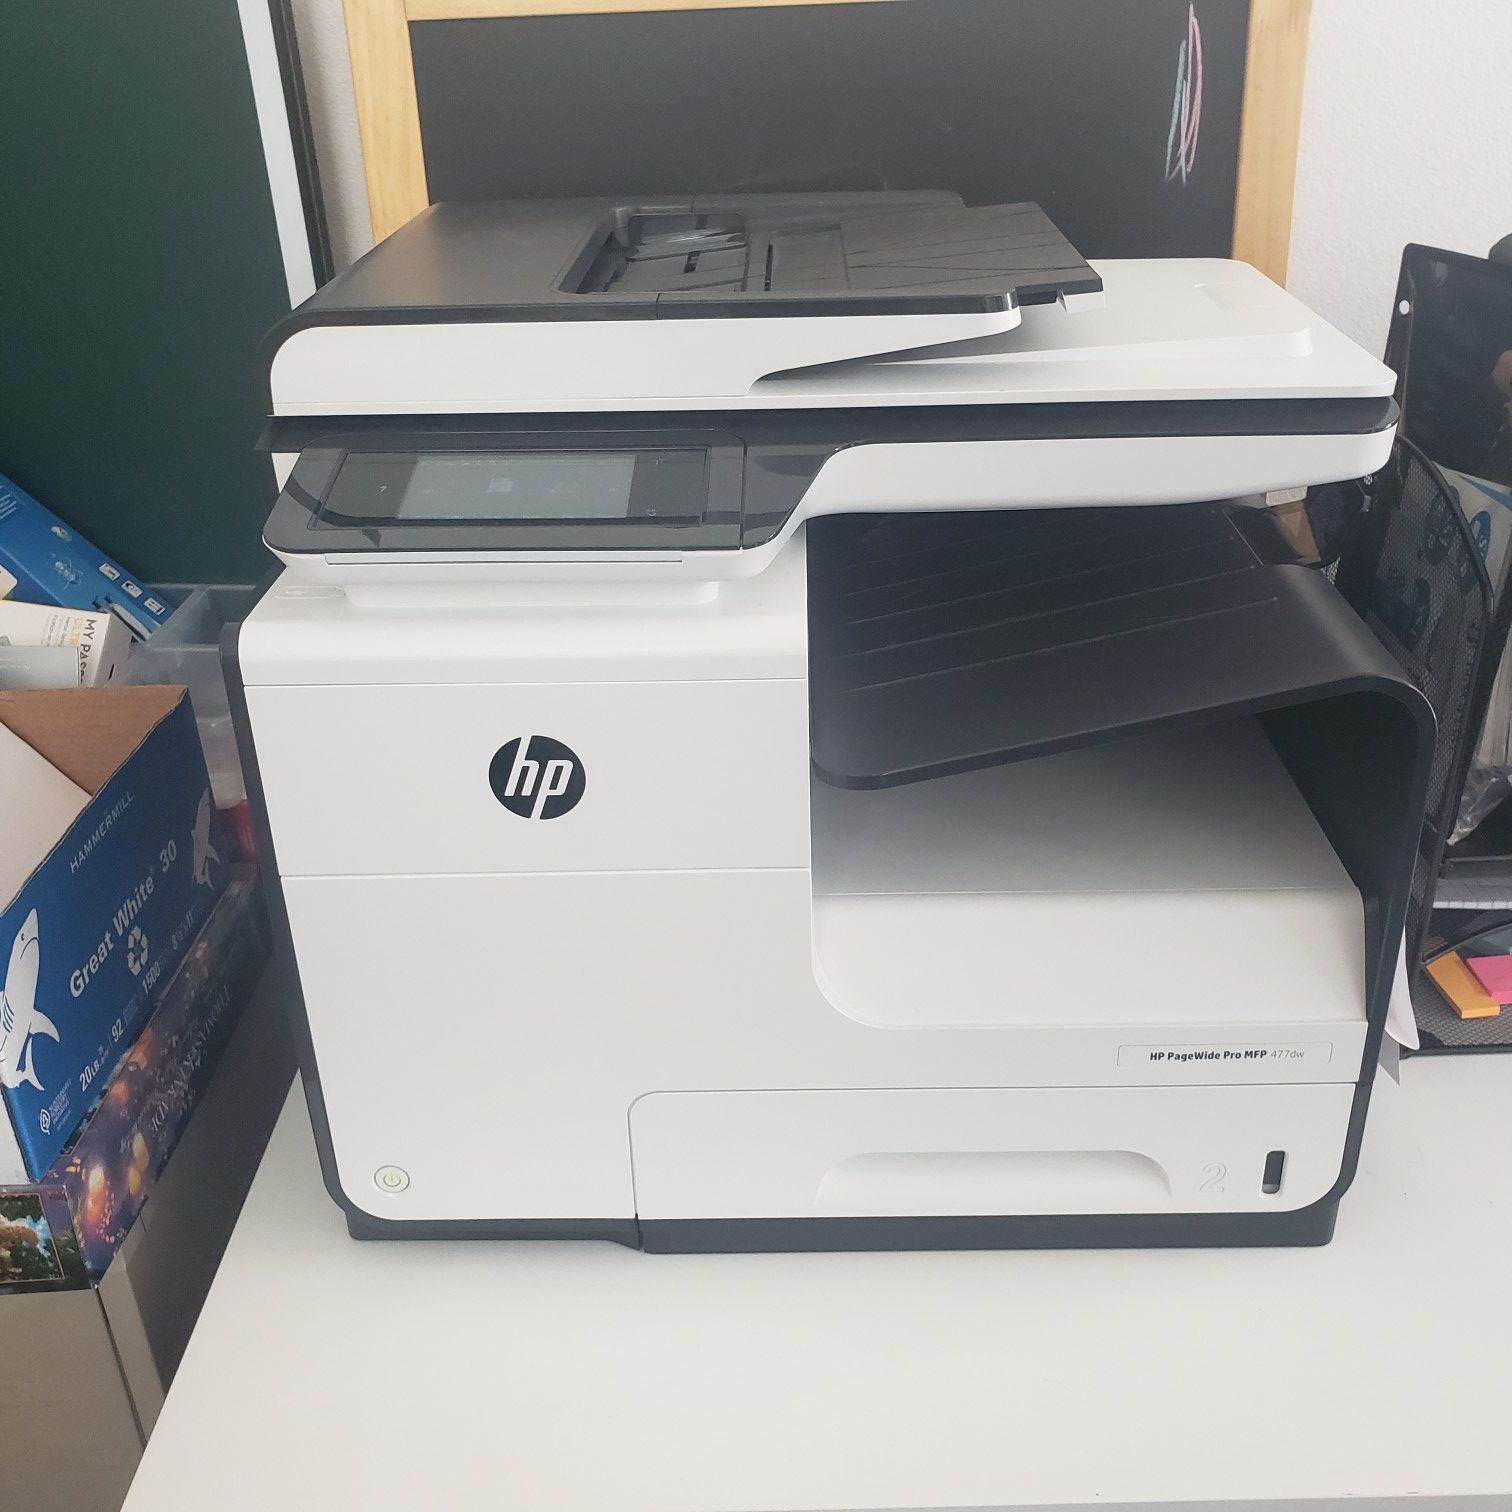 HP PageWide Pro 477dw Sale in Escondido, CA - OfferUp